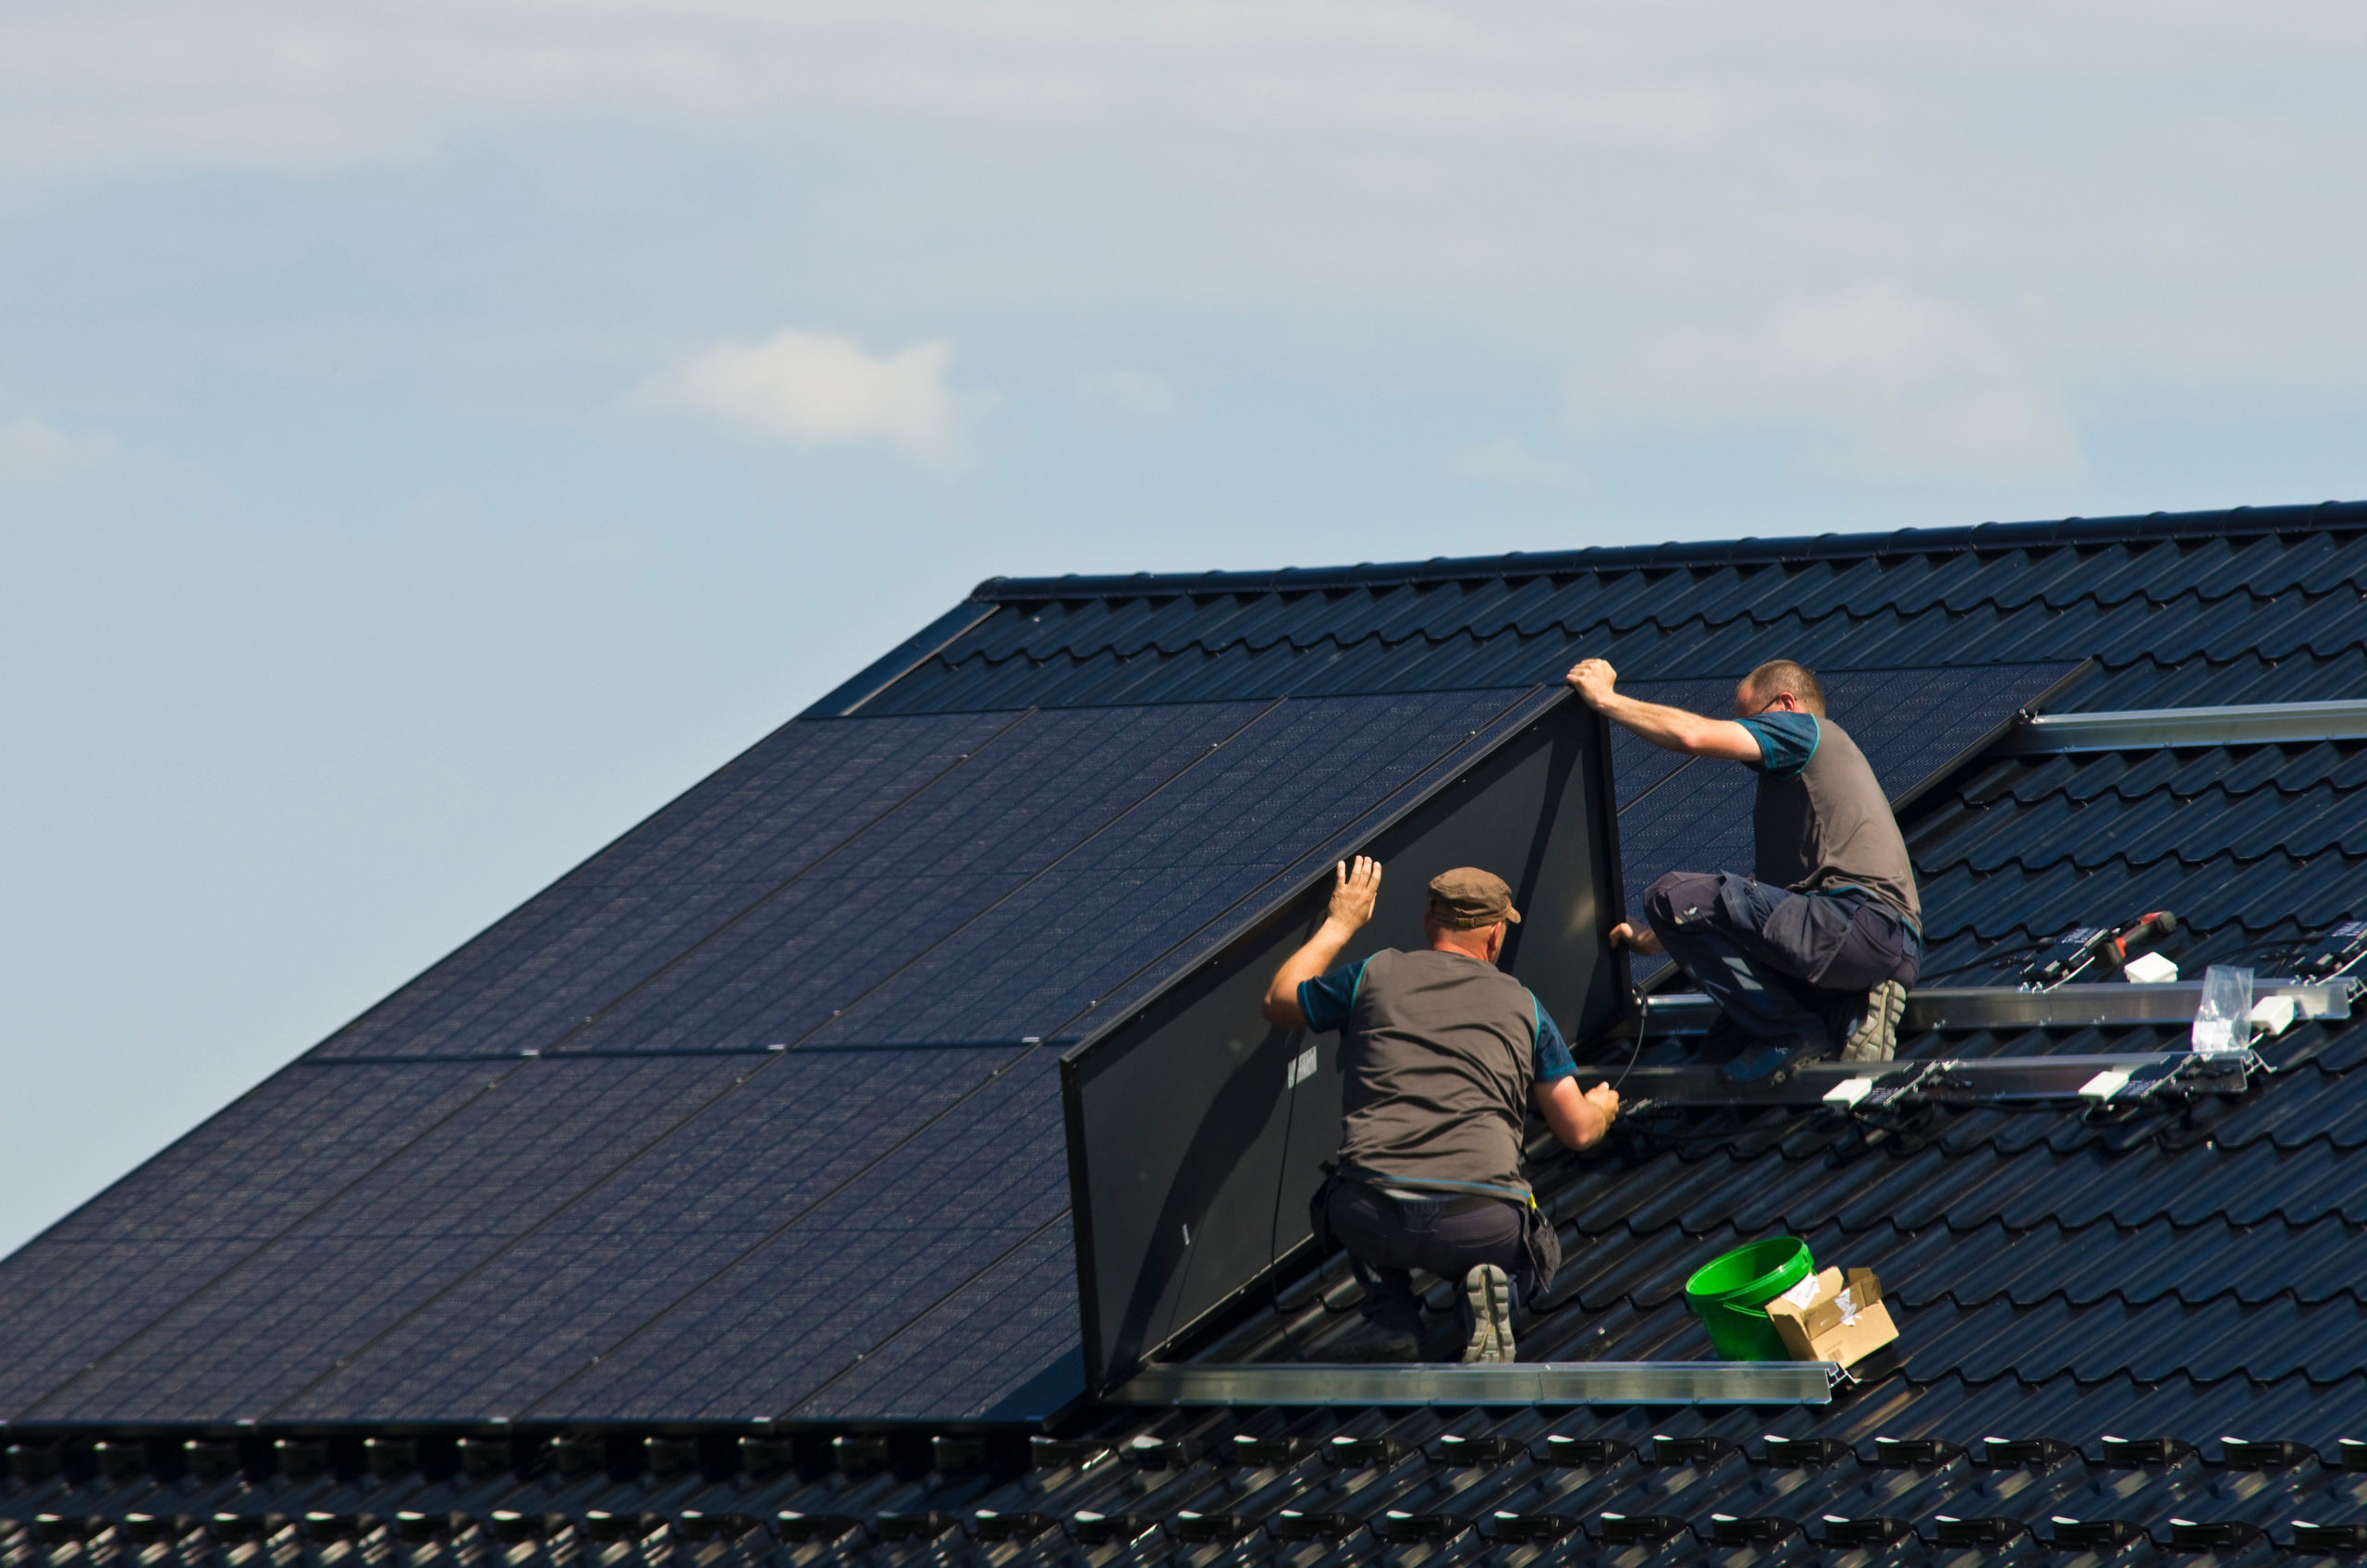 Roofing contractors installing a solar panel on a residential roof